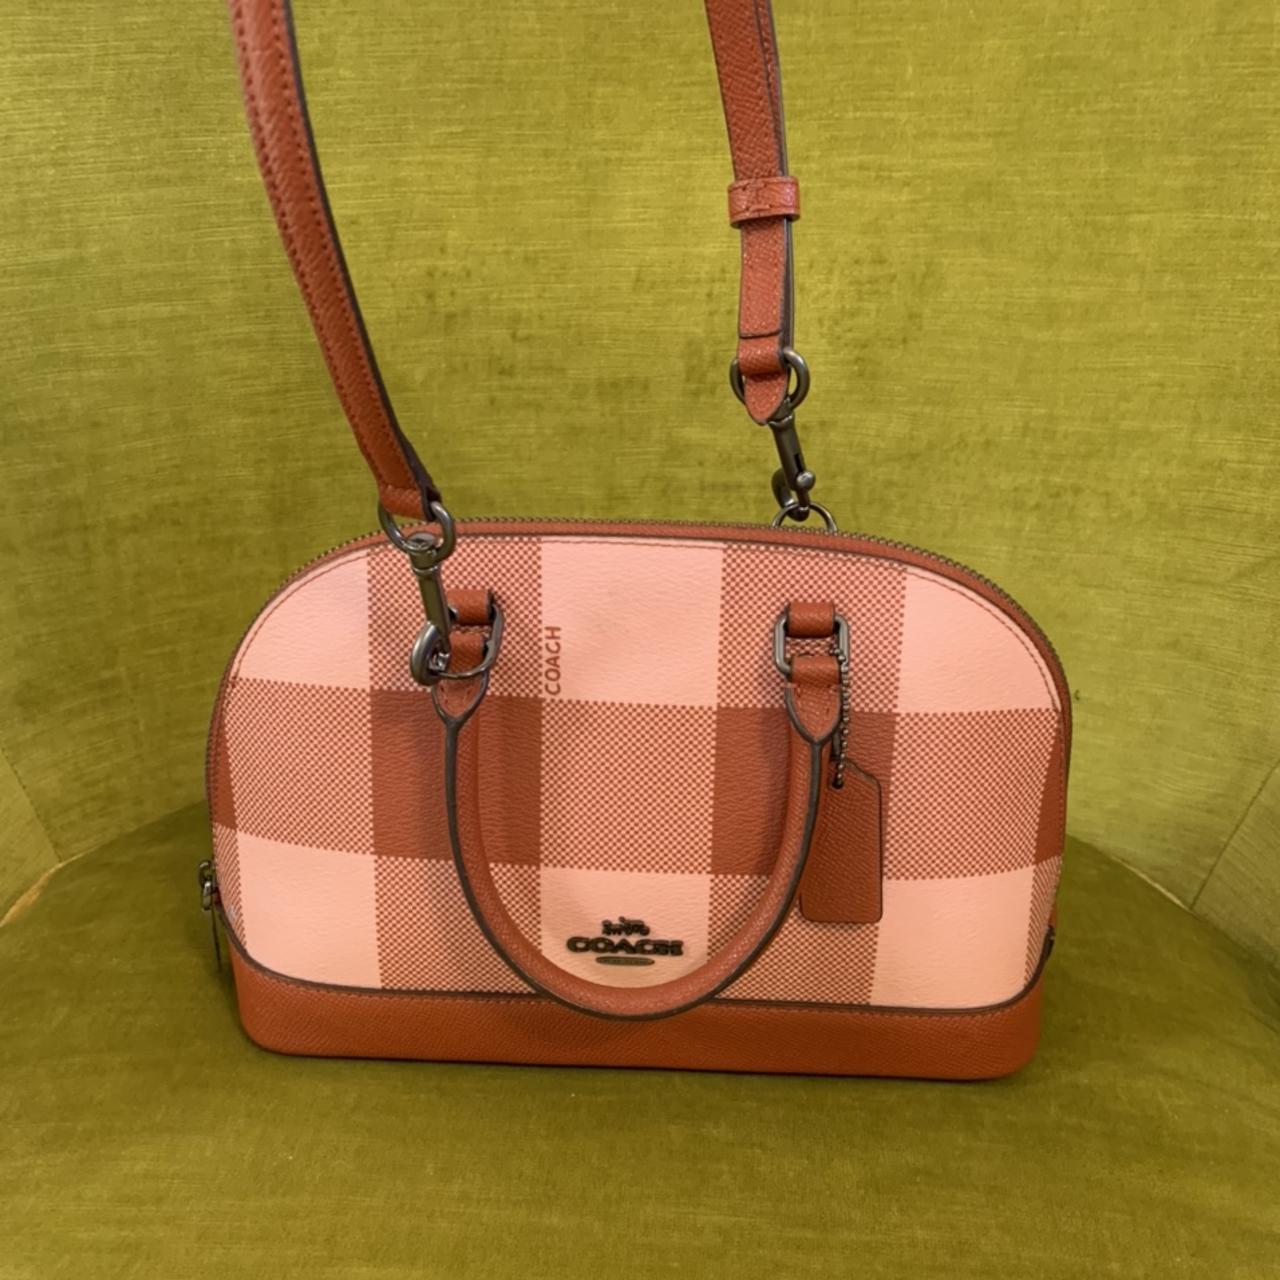 NWOT HOT PINK AUTHENTIC COACH BAG for Sale in Sacramento, CA - OfferUp